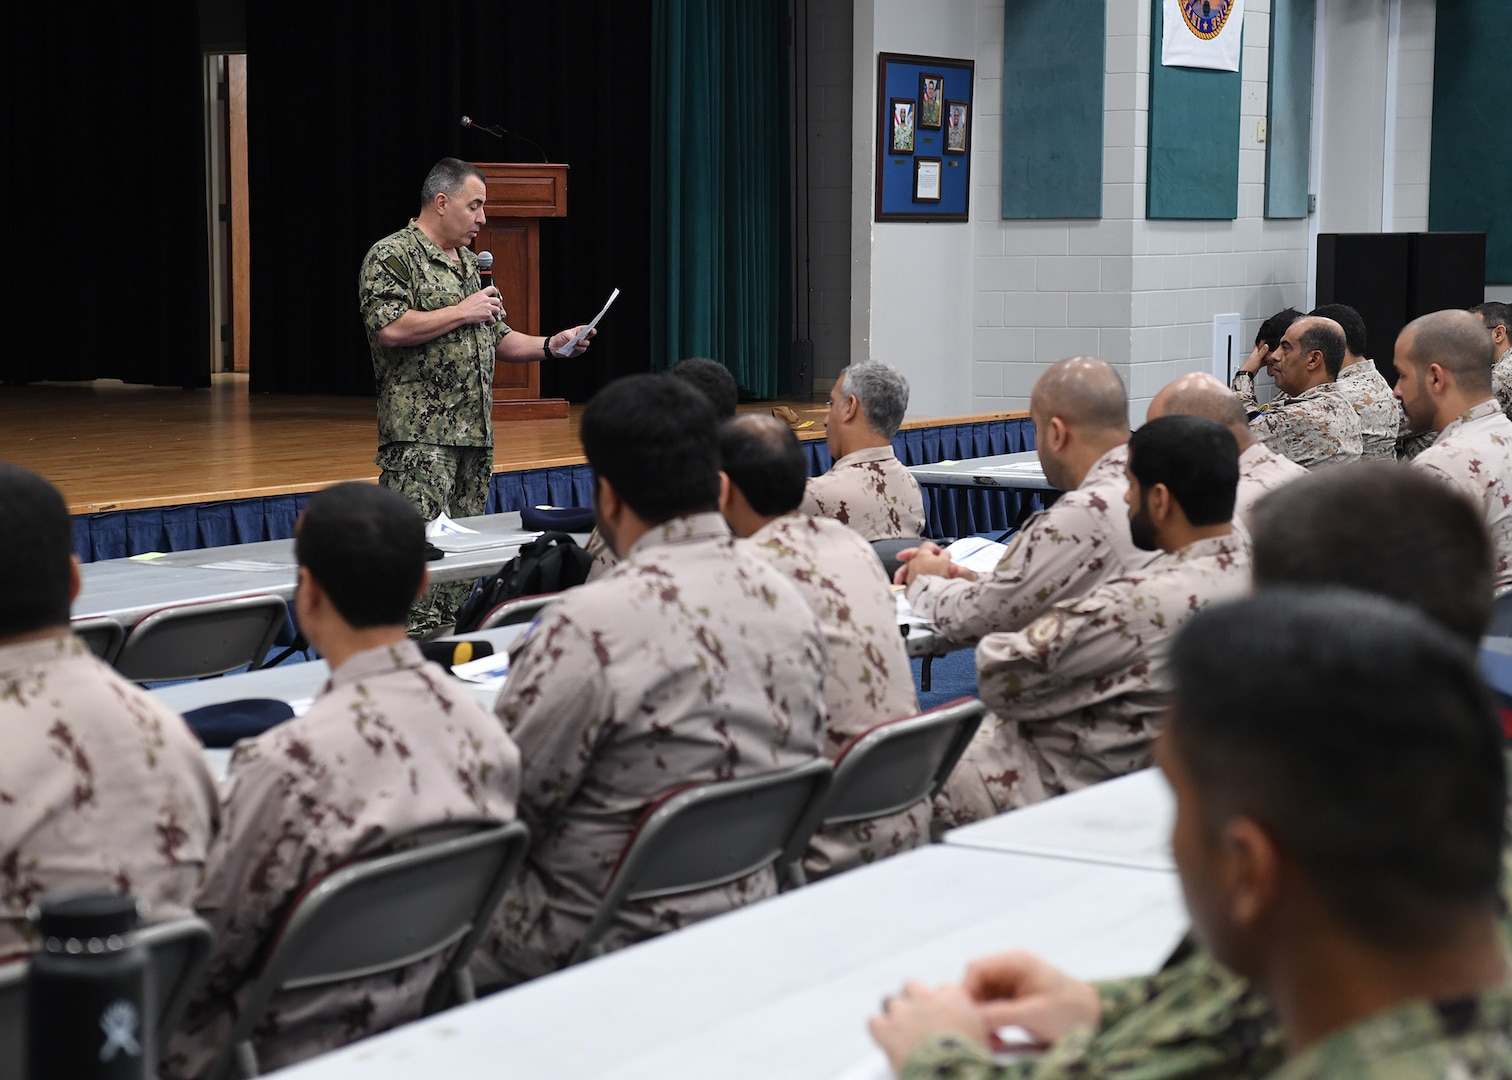 191021-N-KZ419-1055 NAVAL SUPPORT ACTIVITY BAHRAIN, Bahrain (Oct. 21, 2019) Rear Adm. Doug Beal, vice commander of U.S. 5th Fleet, U.S. Naval Forces Central Command and Combined Maritime Forces, speaks during the opening ceremony of International Maritime Exercise (IMX) 2019. IMX 2019 is a multinational engagement involving partners and allies from around the world sharing knowledge and experiences across the full spectrum of defensive maritime operations. The exercise serves to demonstrate global resolve in maintaining regional security and stability, freedom of navigation and the free flow of commerce from the Suez Canal south to the Bab-el-Mandeb through the Strait of Hormuz to the Northern Arabian Gulf. (U.S. Navy photo by Mass Communication Specialist 3rd Class Dawson Roth/Released)